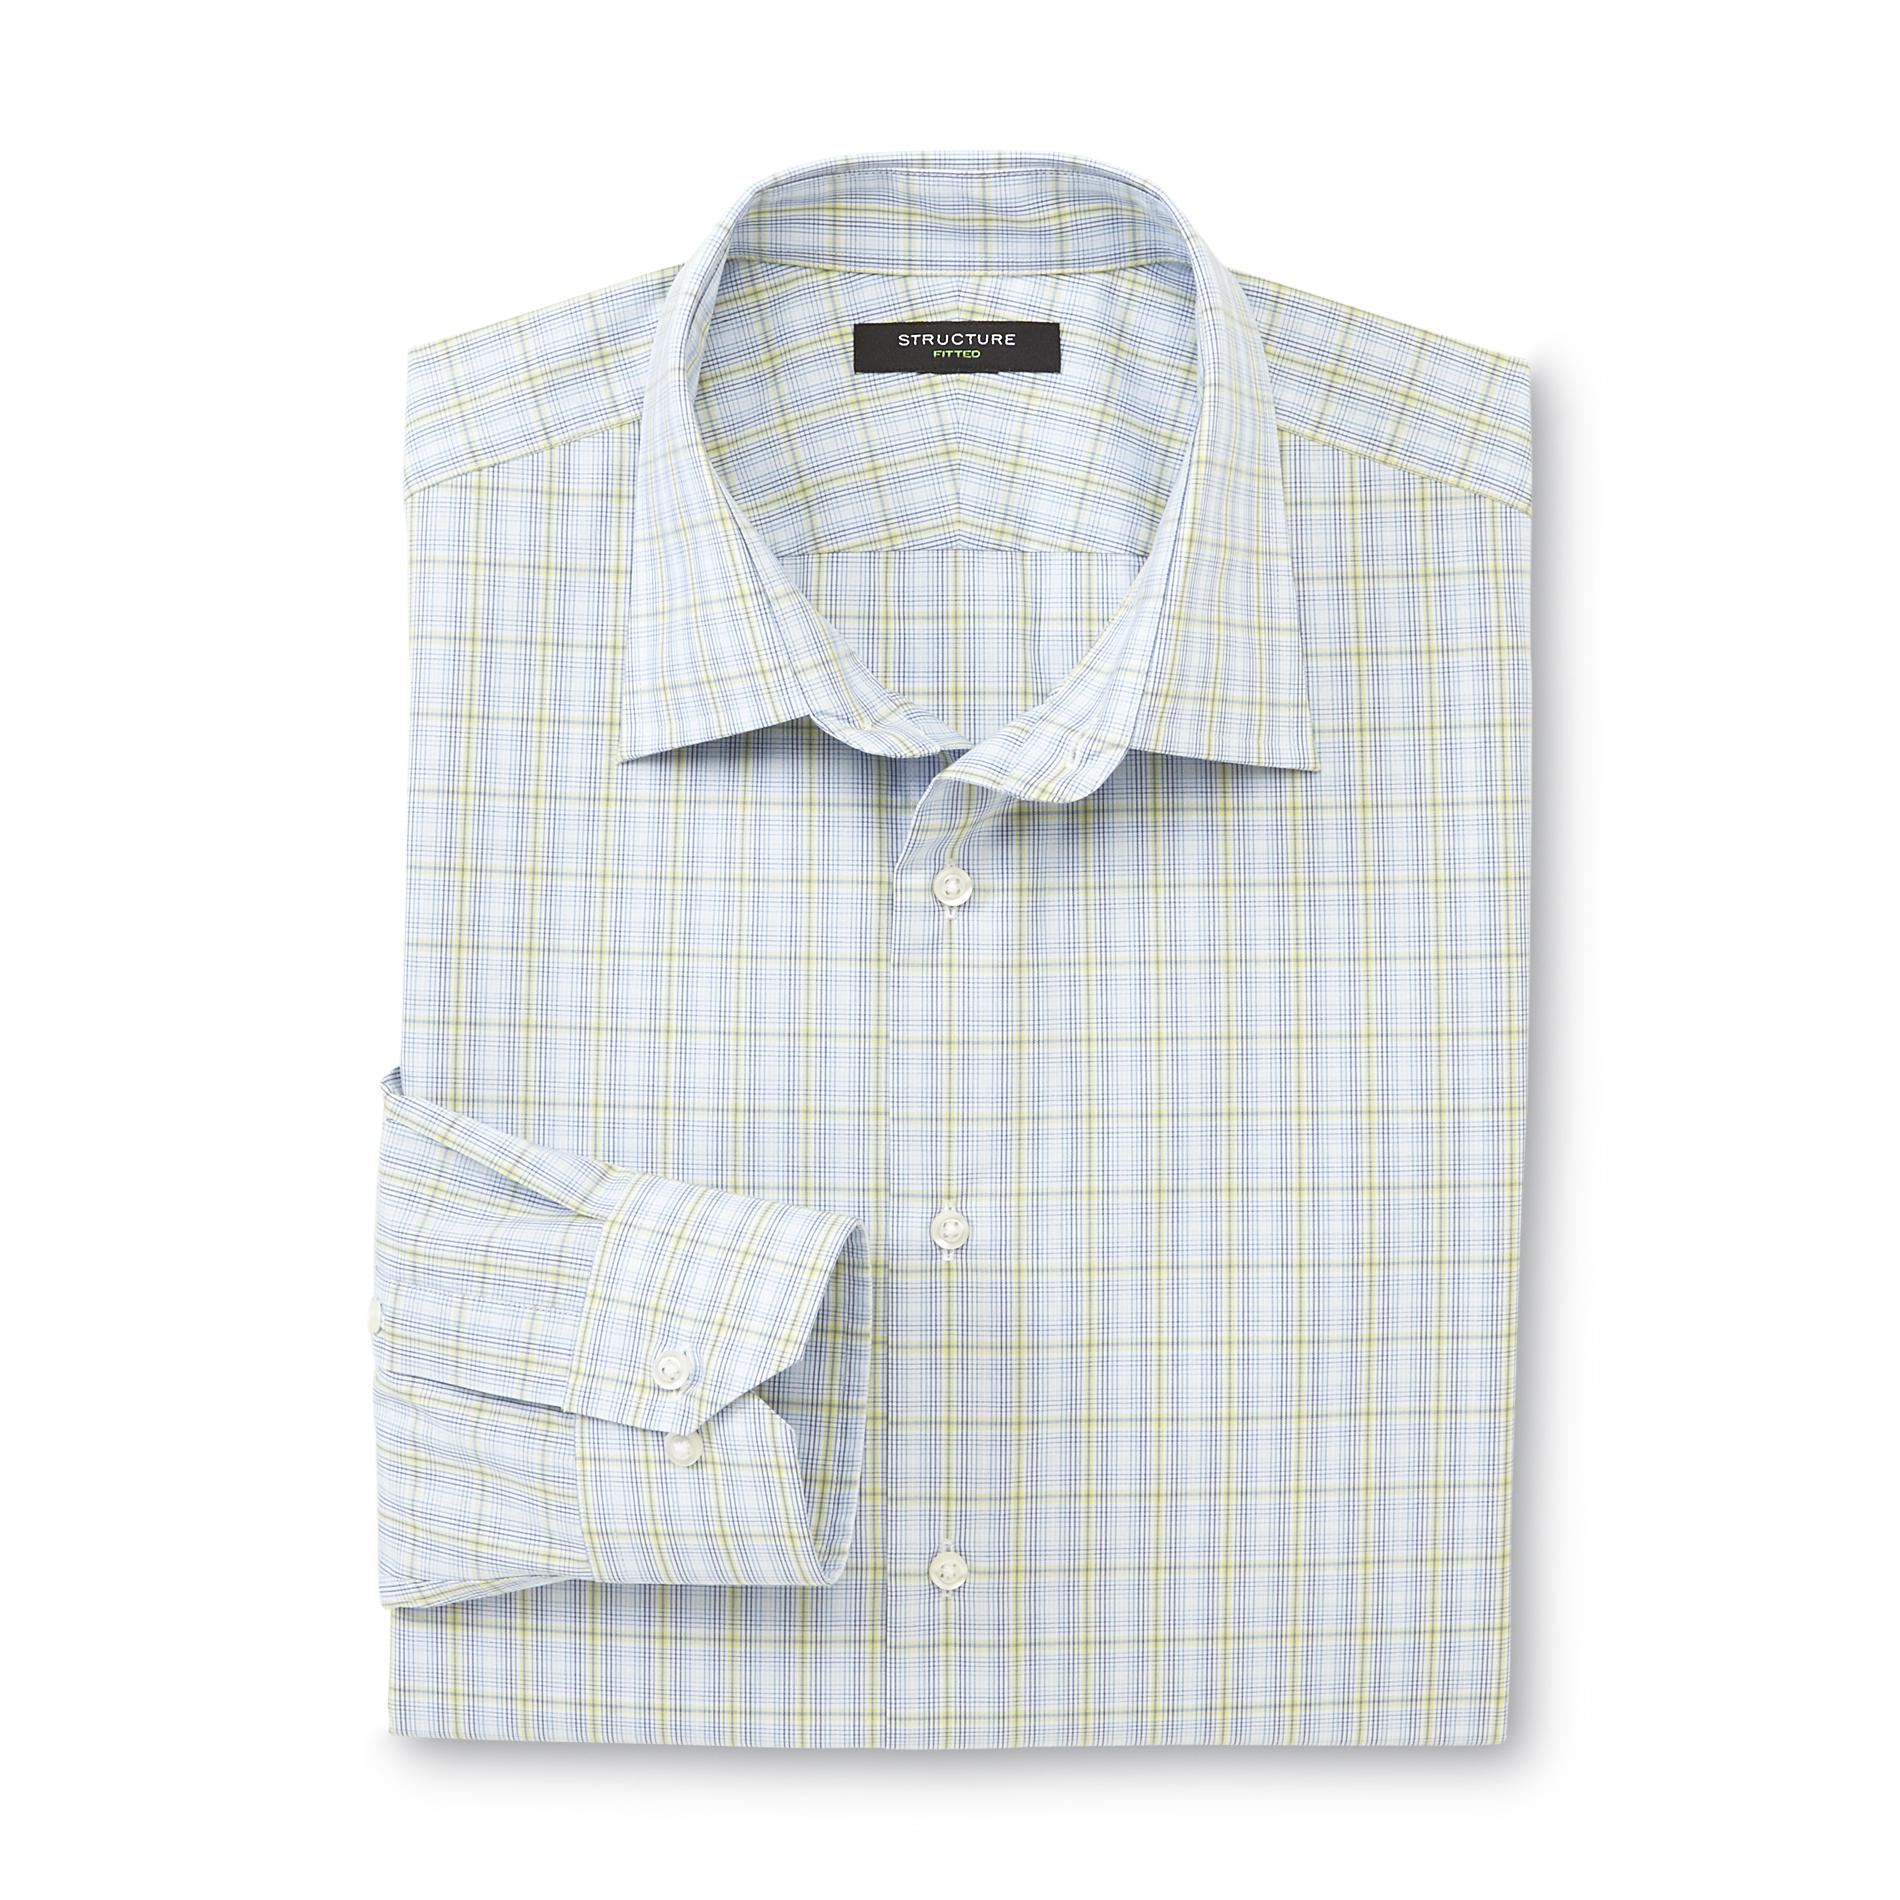 Structure Men's Fitted Dress Shirt - Plaid